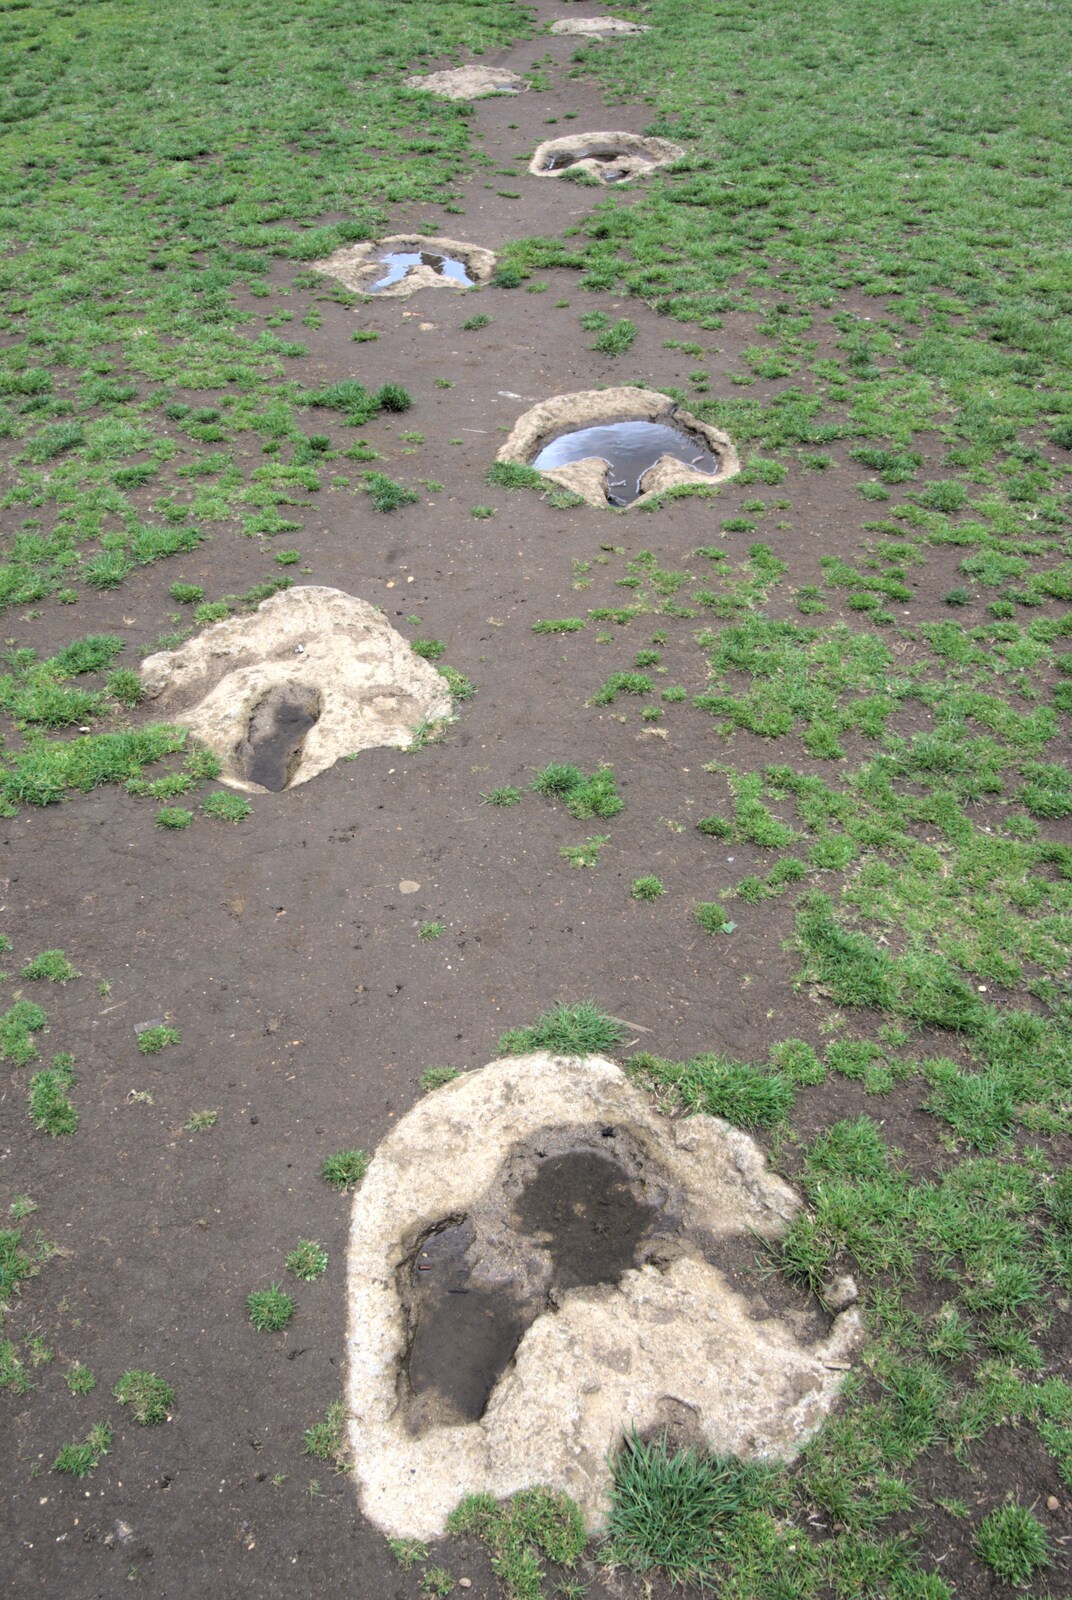 Fake dinosaur footprints are stuck in the ground from A Camper Van Odyssey: Oxford, Salisbury, New Forest and Barton-on-Sea - 19th June 2011